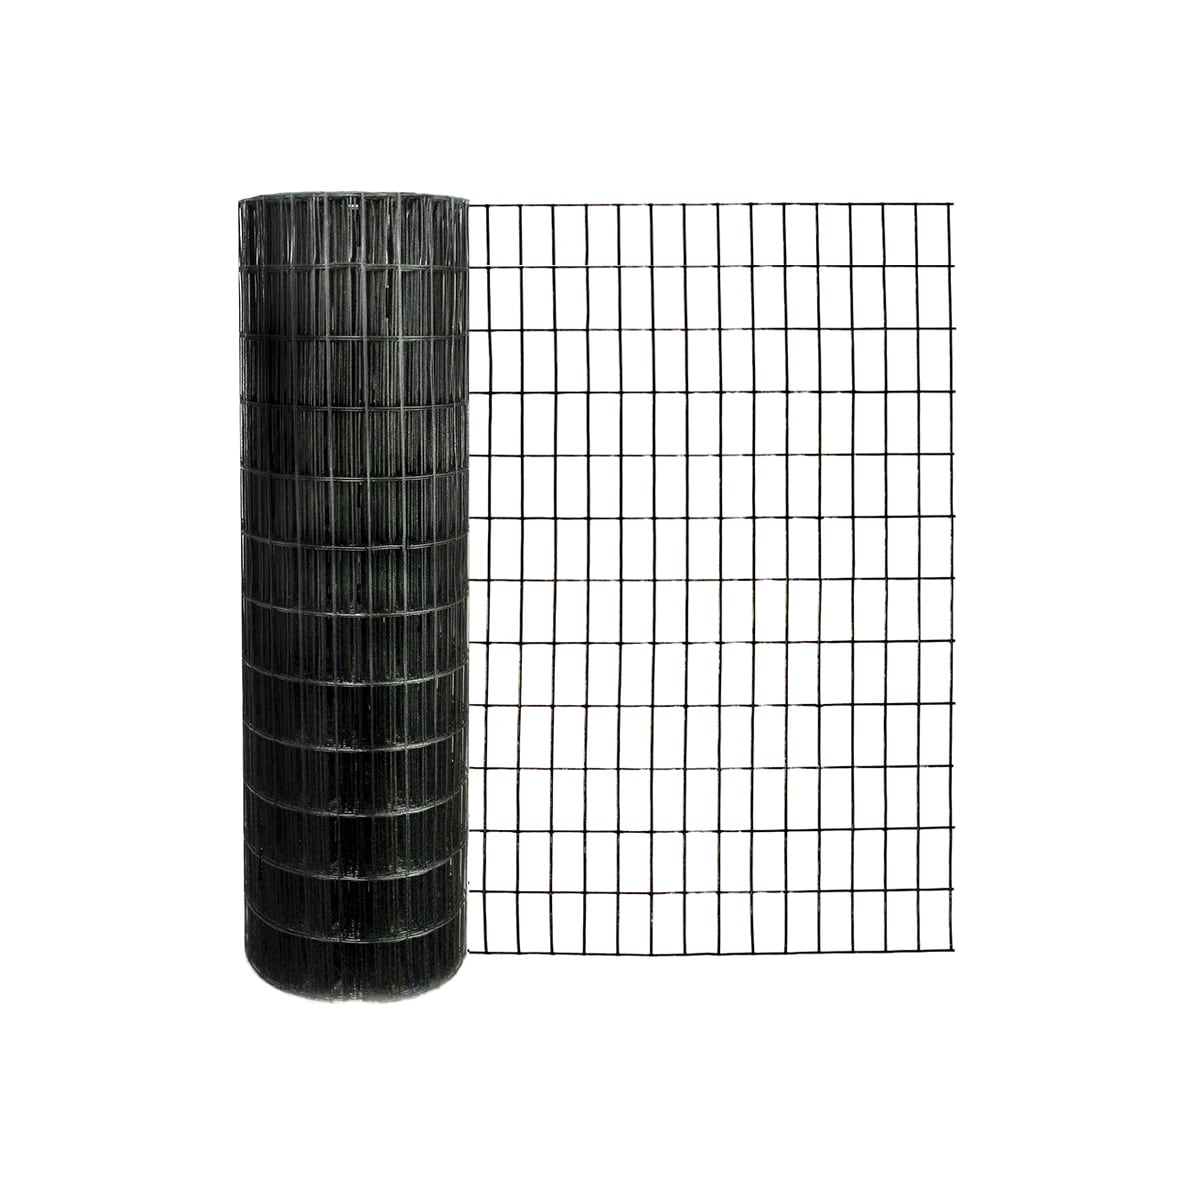 Garden PVC coated welded wire Rolled Fencing at Lowes.com